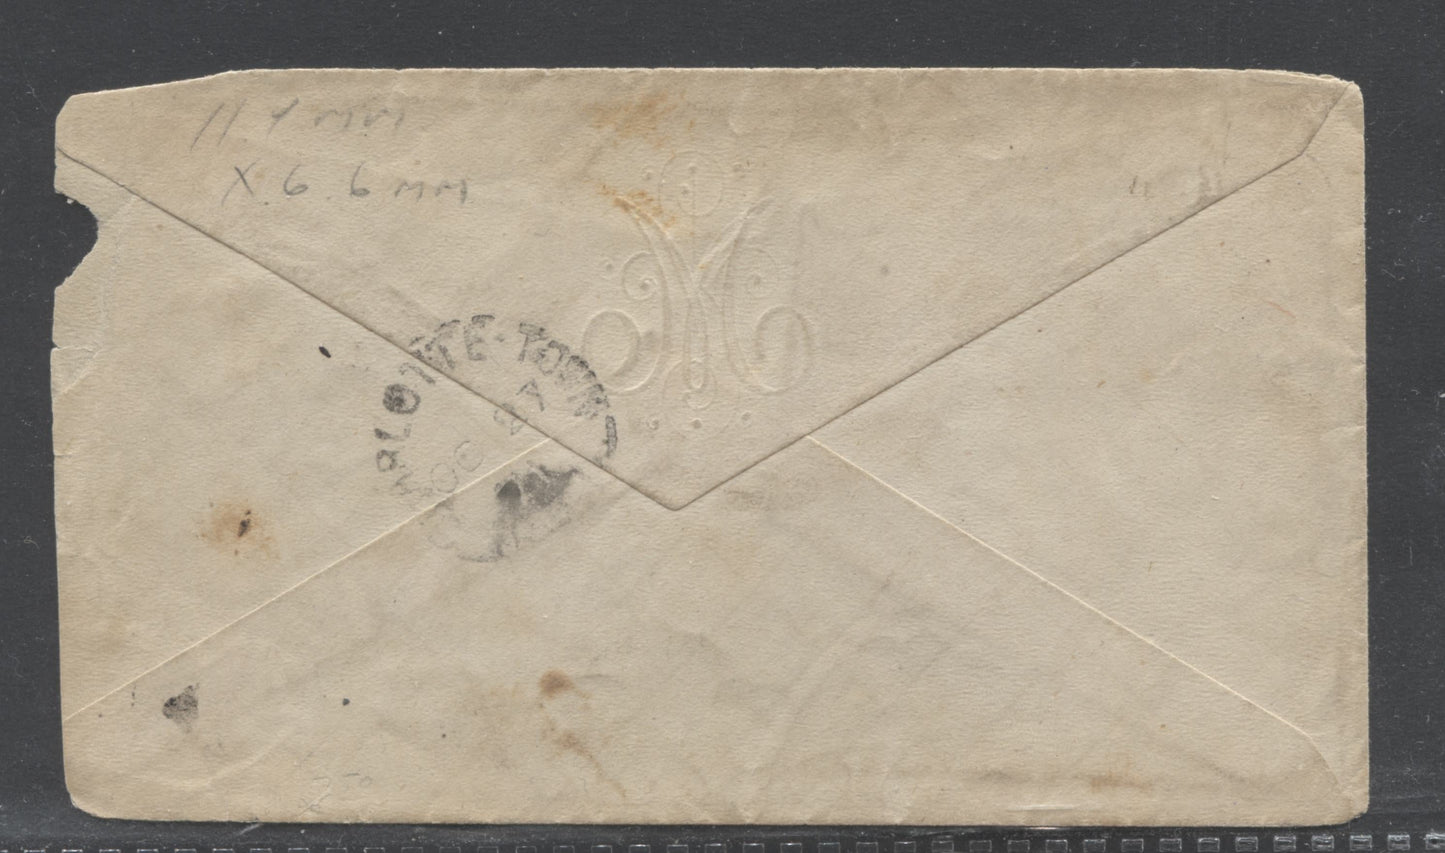 Lot 18 Prince Edward Island #5 2d Deep Rose Perf. 12 x 11.75 Die 1 Single Usage on October 27, 1871 Cover to Charles Binns, Lawyer in Charlottetown